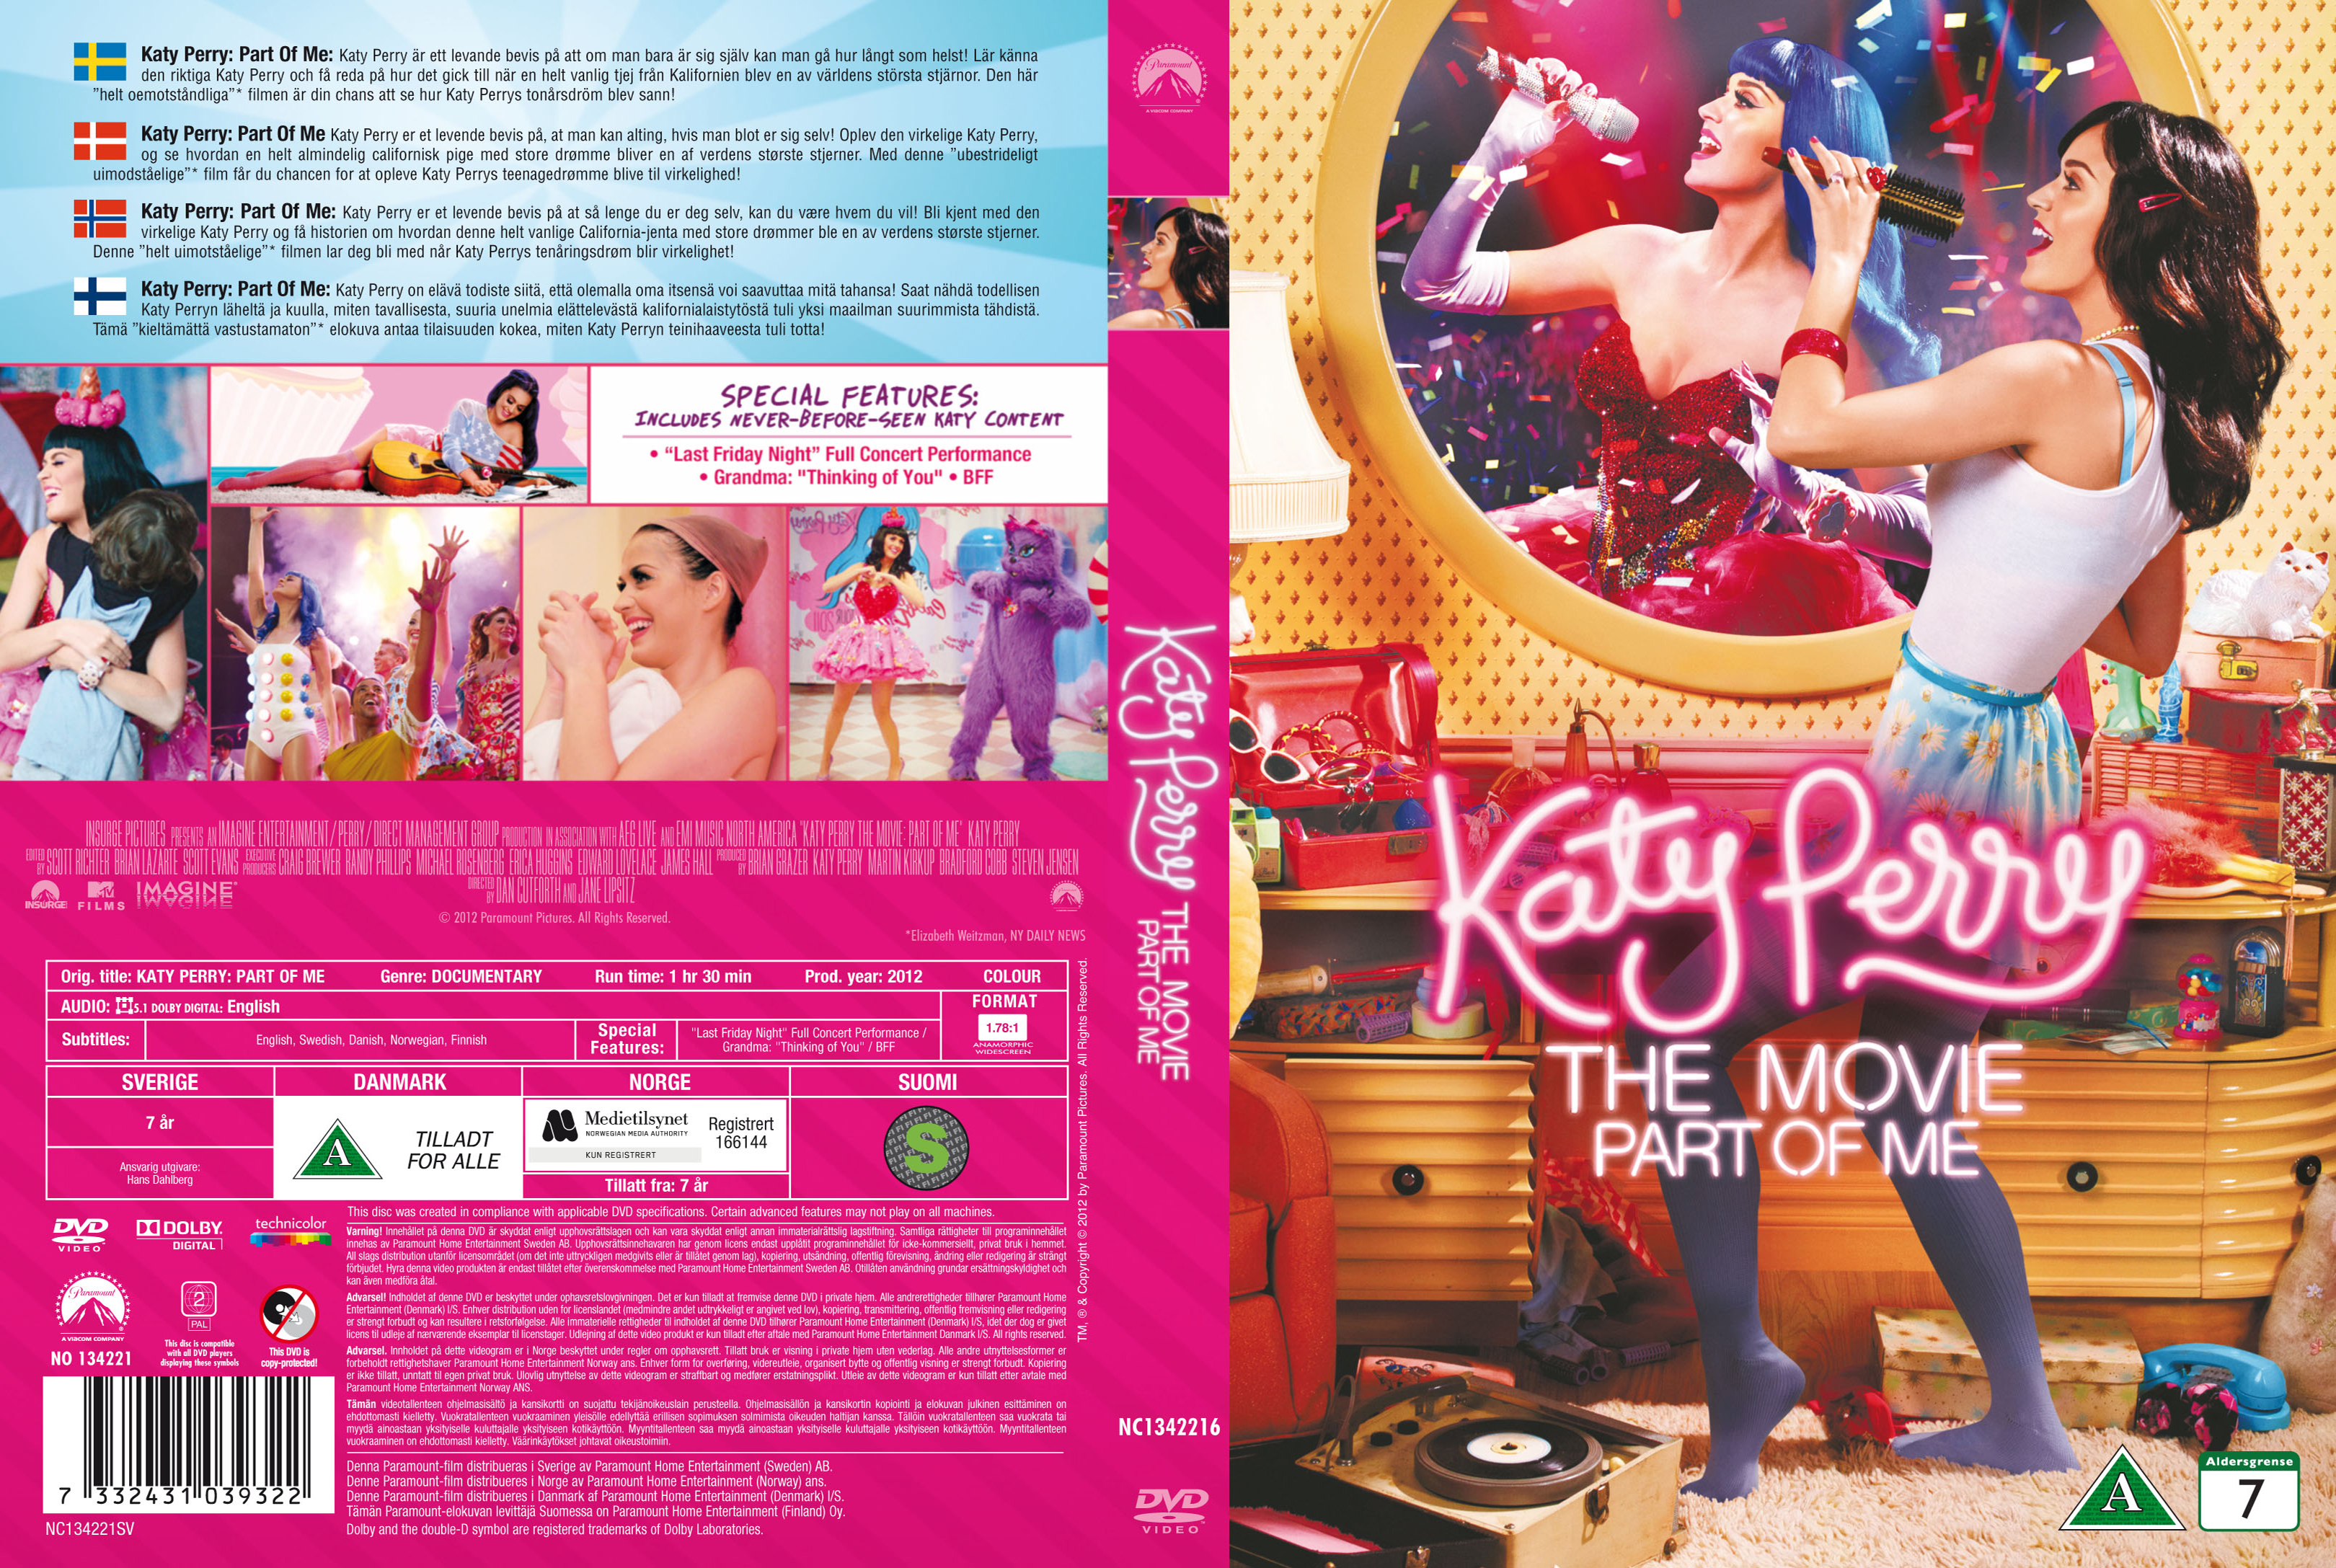 katy perrys a part of me blue ray torrent